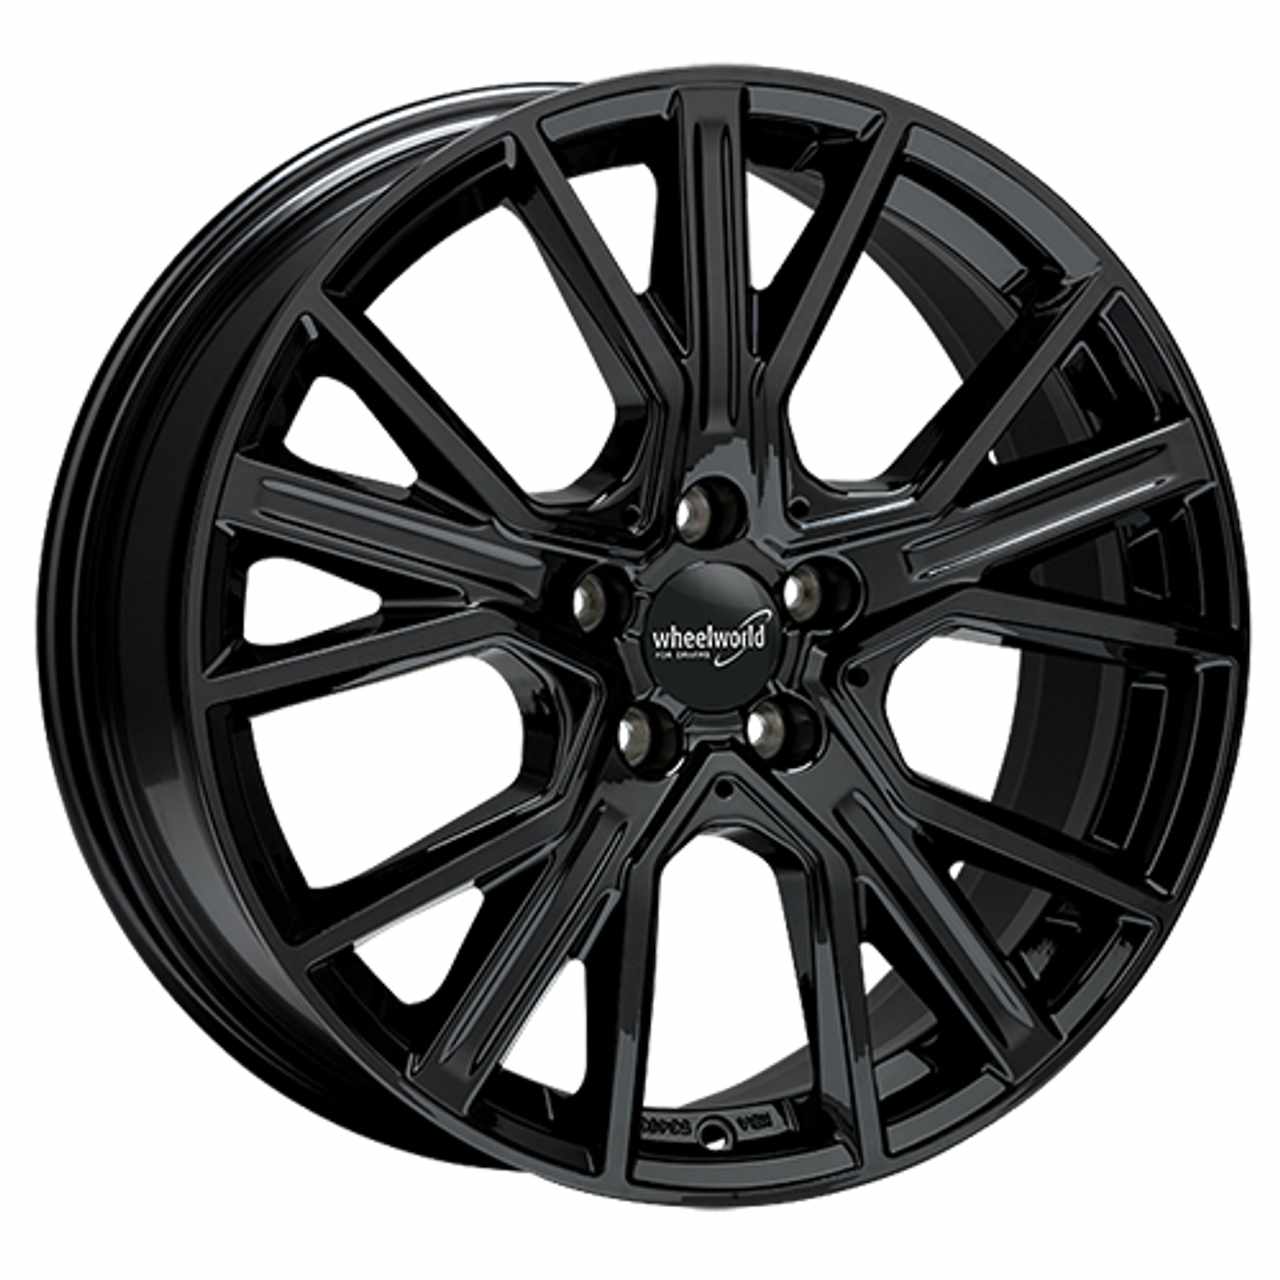 WHEELWORLD-2DRV WH34 black glossy painted 8.5Jx20 5x112 ET30